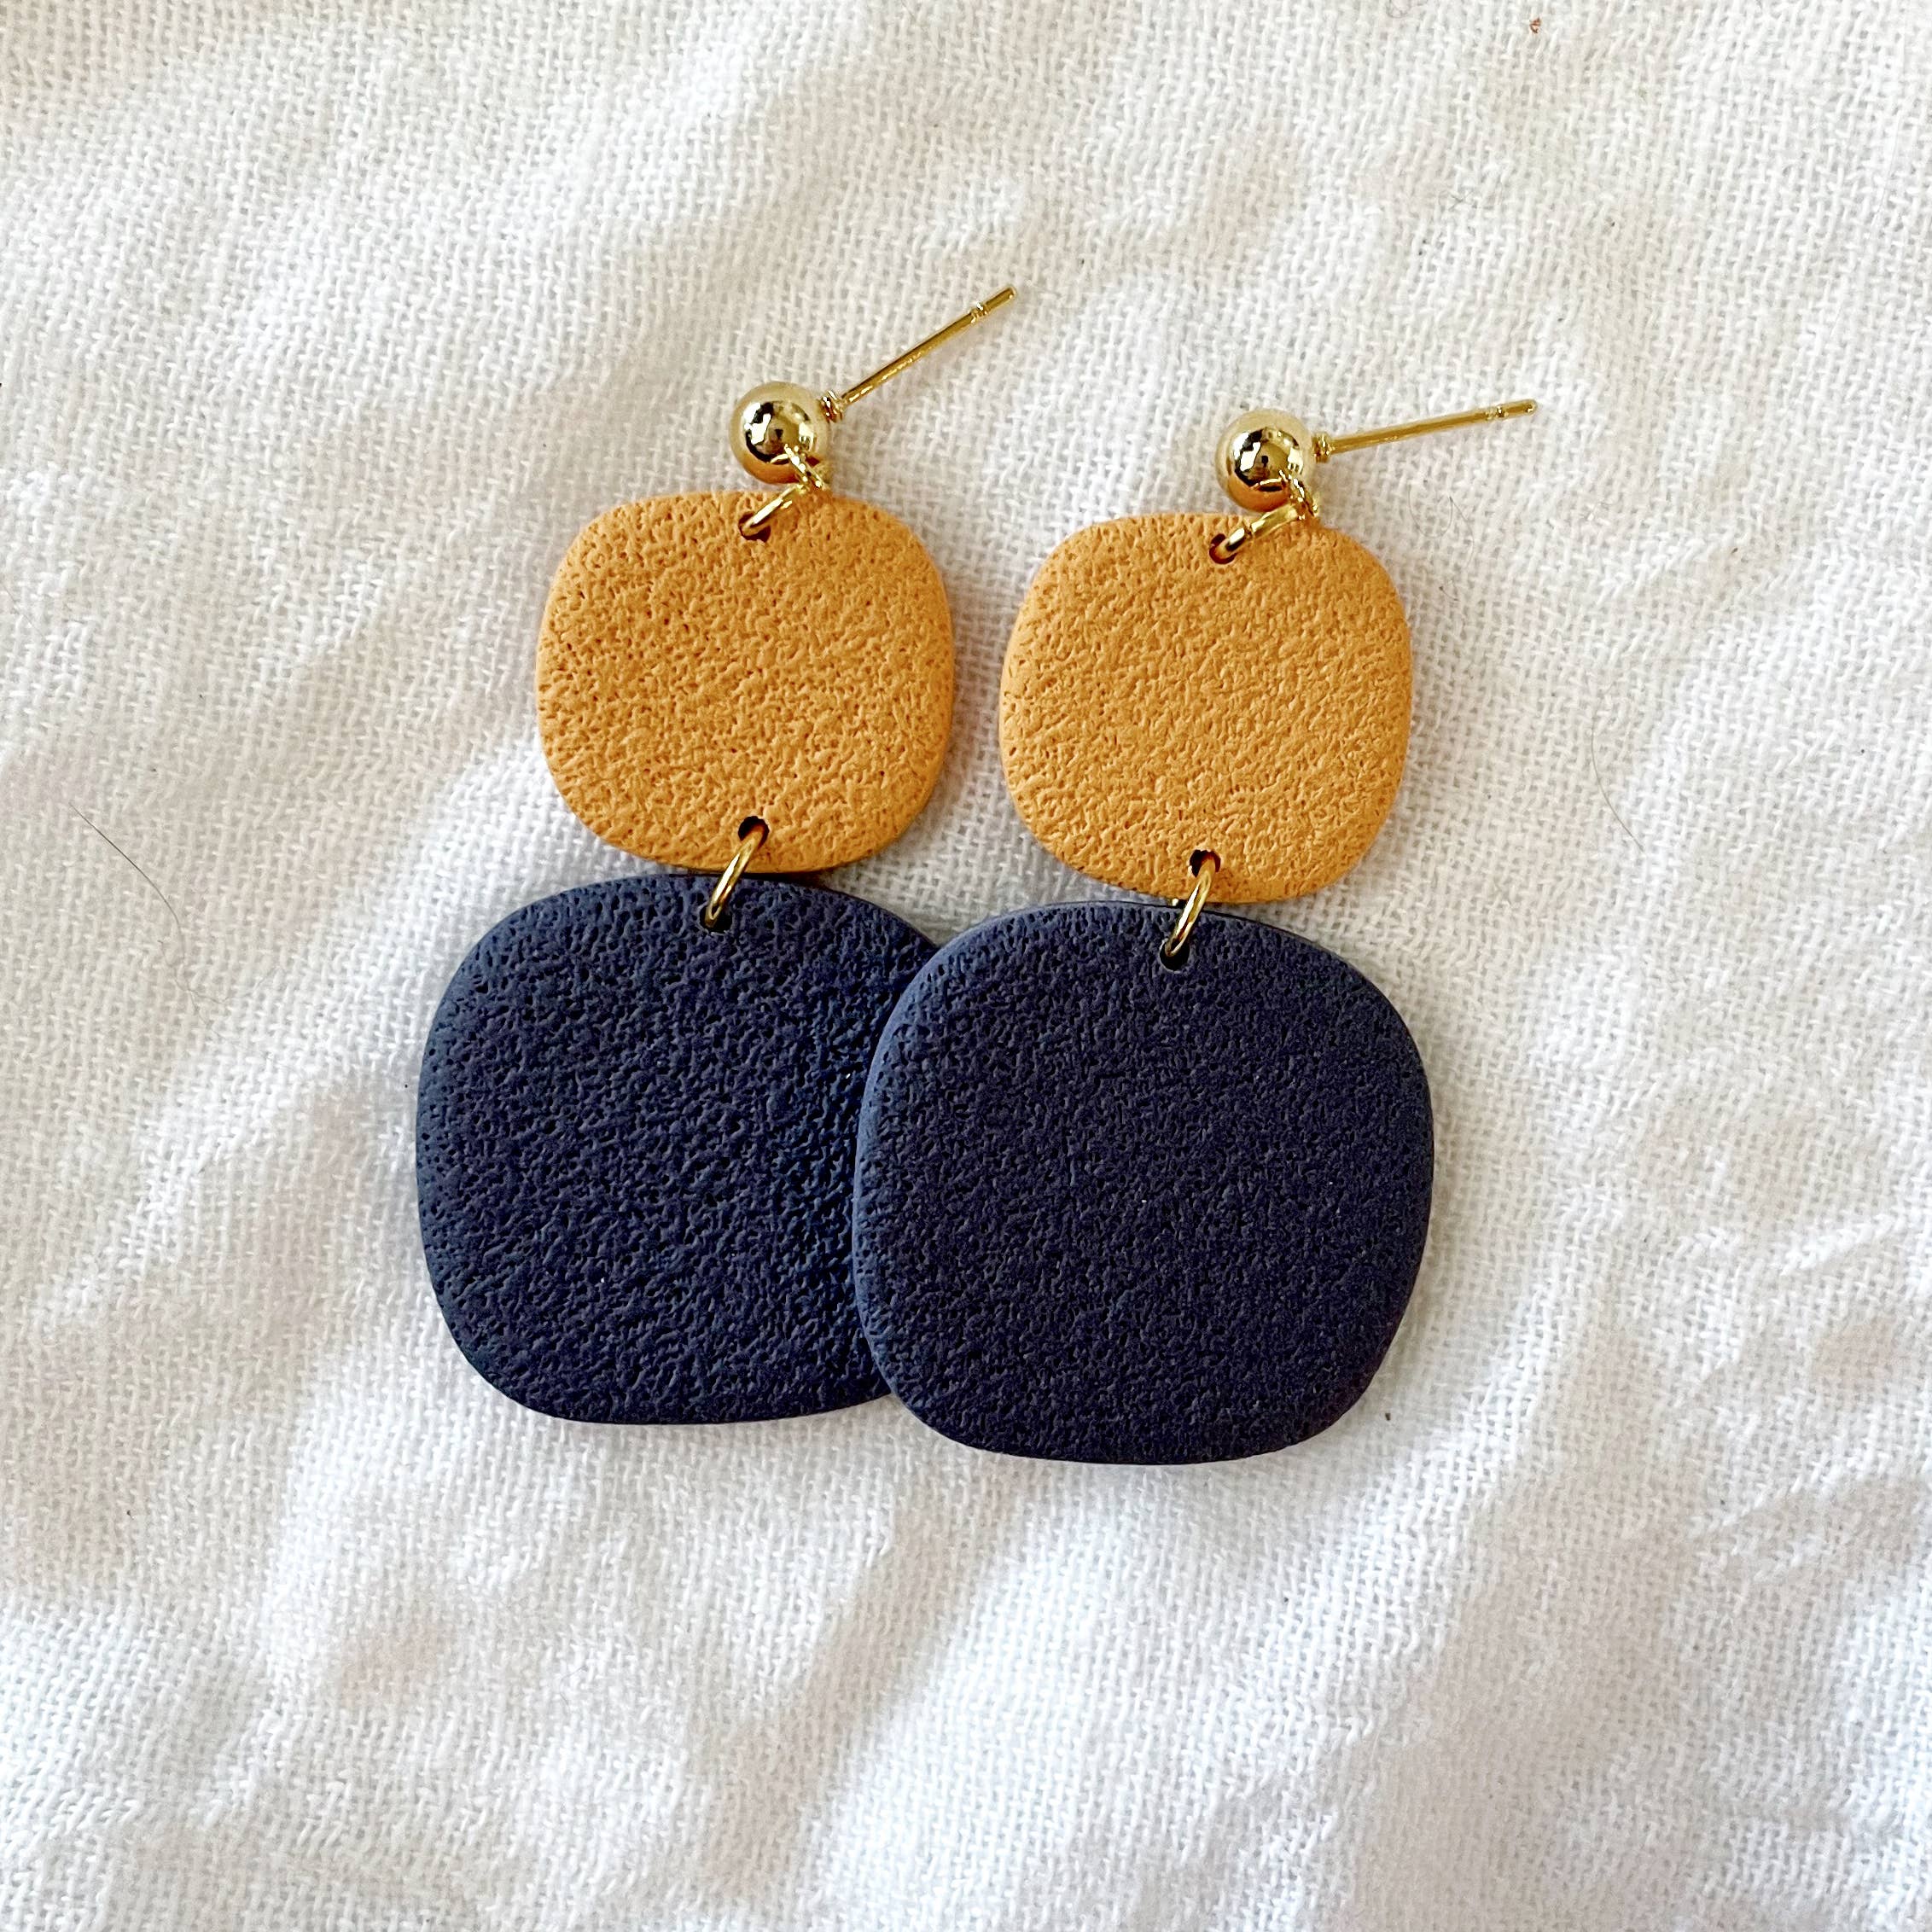 Coraline | Organic Square Polymer Clay Earrings